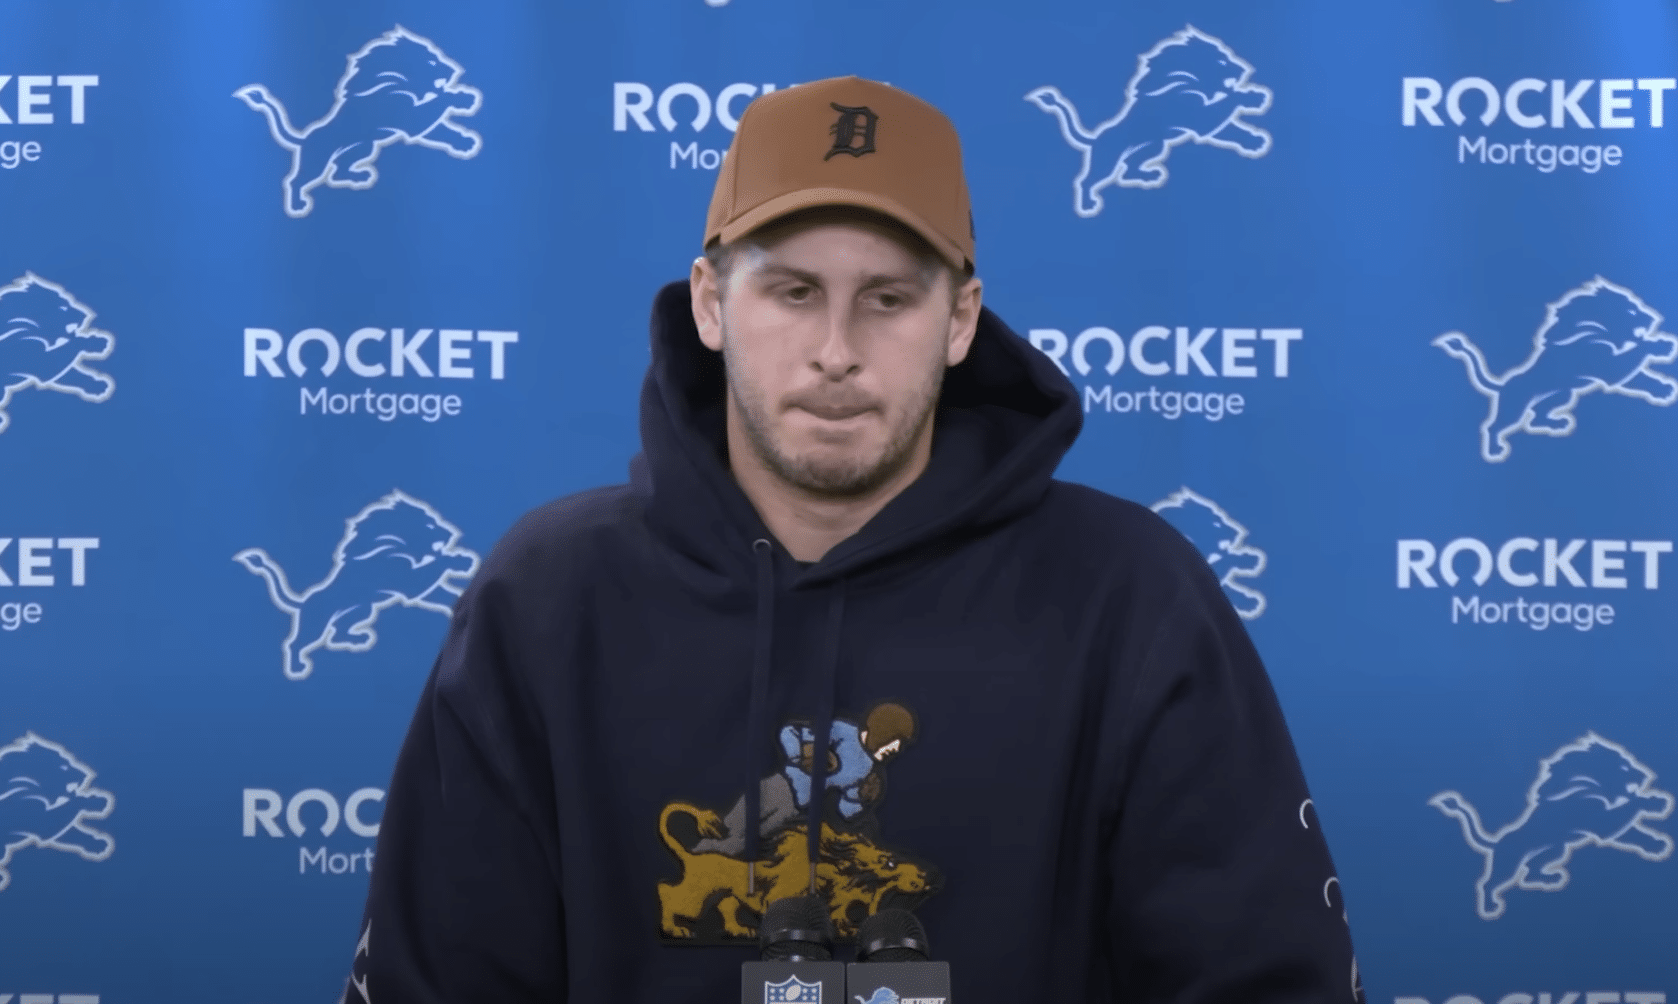 Detroit Lions QB Jared Goff Jared Goff says Detroit LionsJared Goff gets emotional Jared Goff says Detroit Lions Jared Goff responds to question Jared Goff could break NFL record